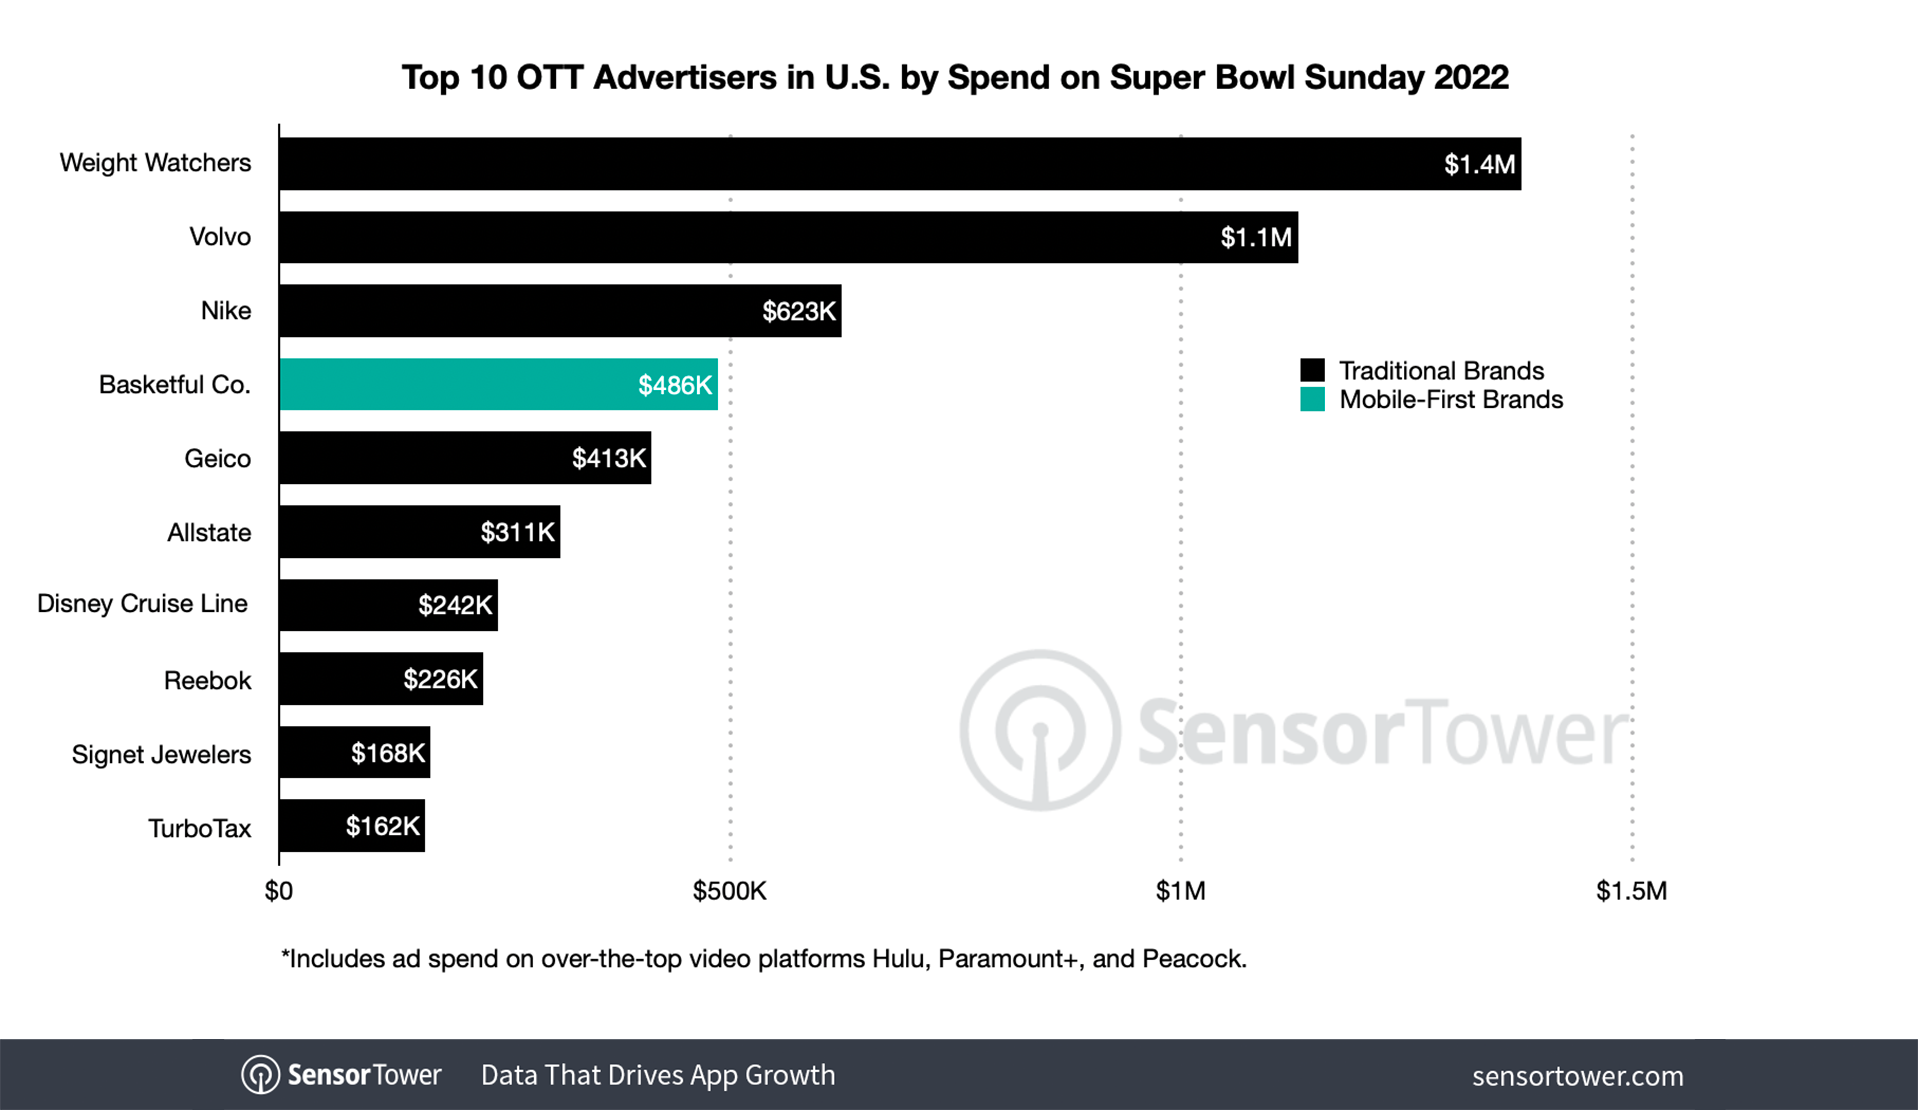 Super Bowl Advertisements Nearly Quadrupled Crypto App Installs in the U.S.